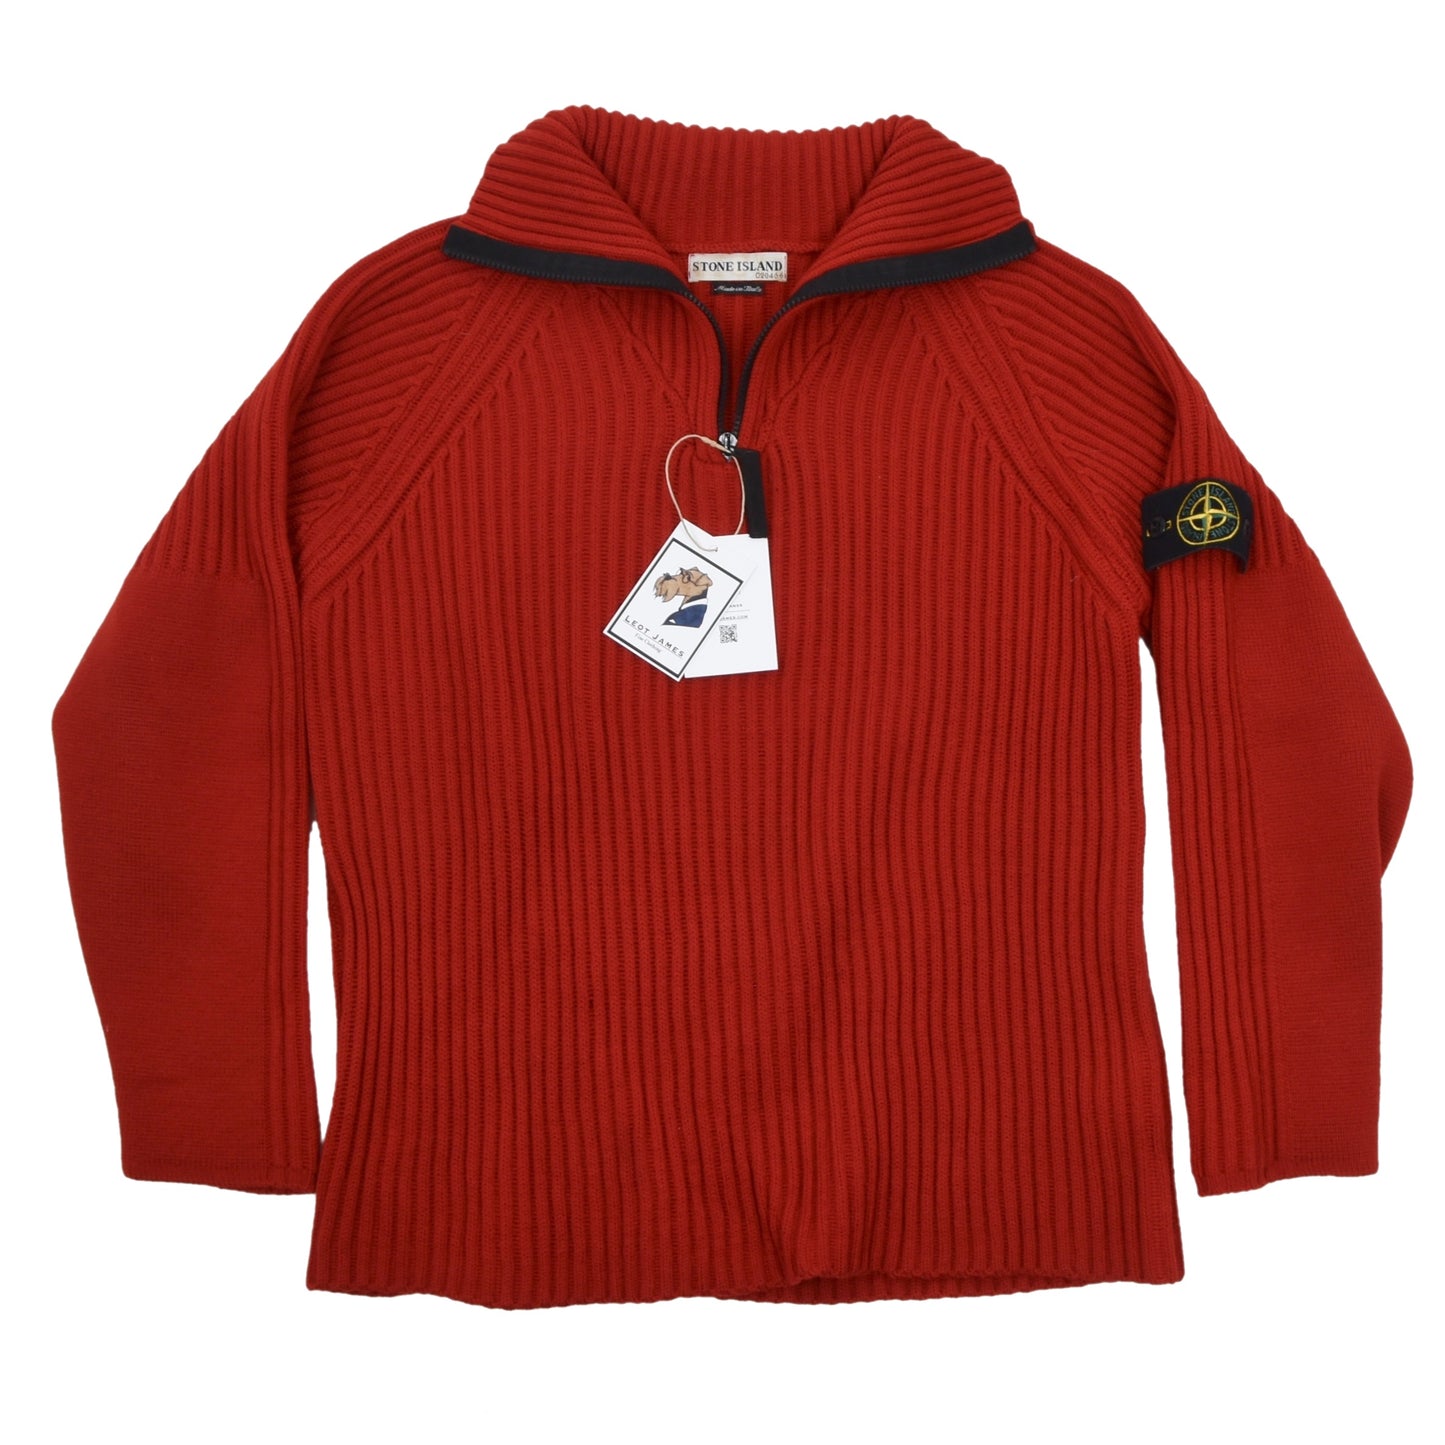 Stone Island Wool Sweater Vintage 2000 Size M - Red